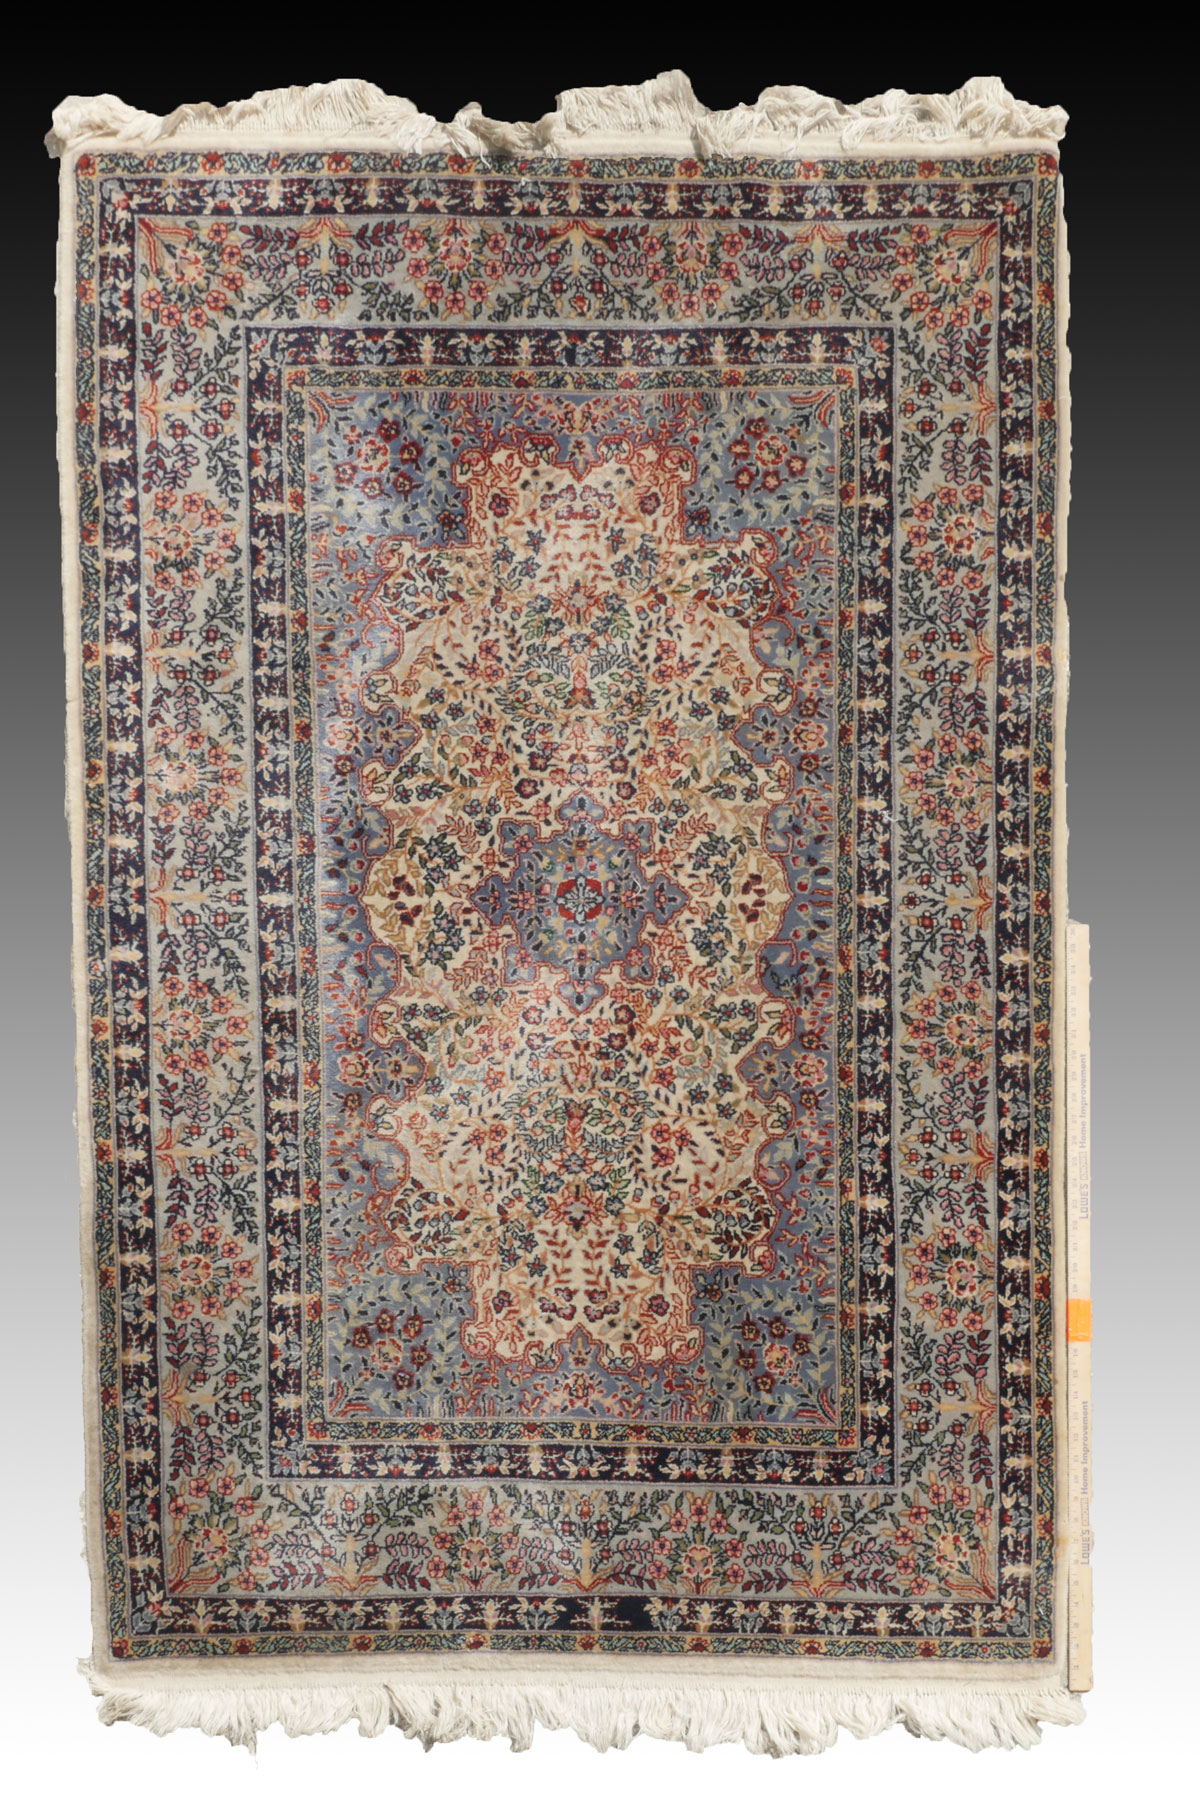 PAK PERSIAN HAND KNOTTED WOOL RUG 36c035